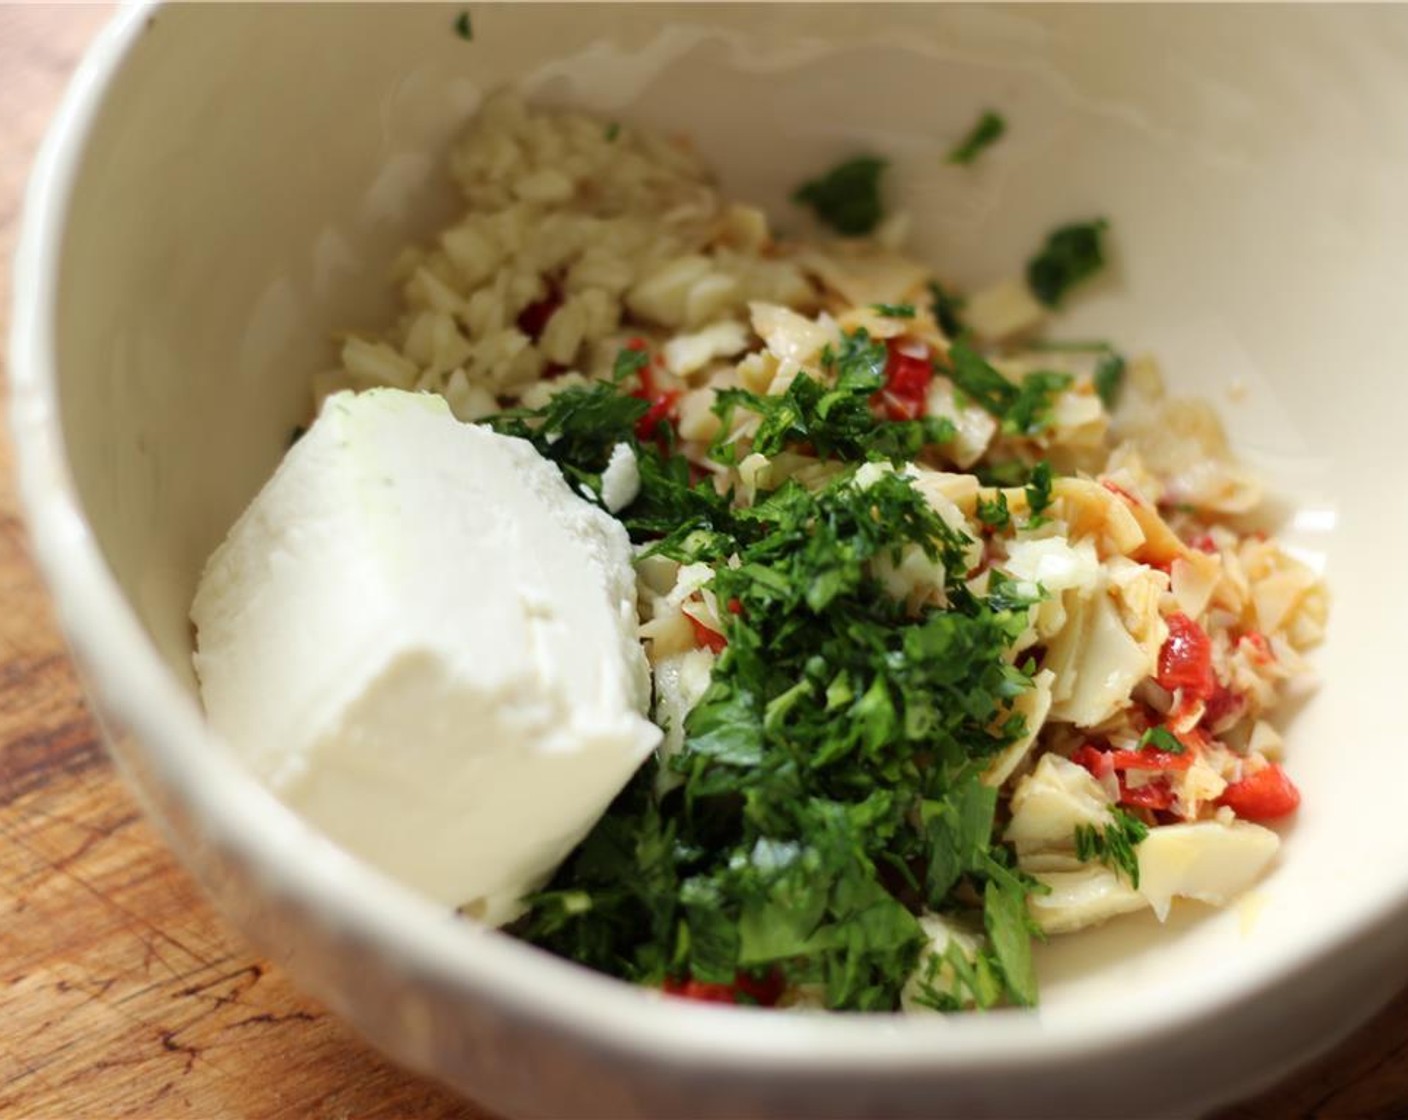 step 3 In a small bowl, mash the Goat Cheese (1/2 cup) with the parsley, artichoke hearts, and garlic.